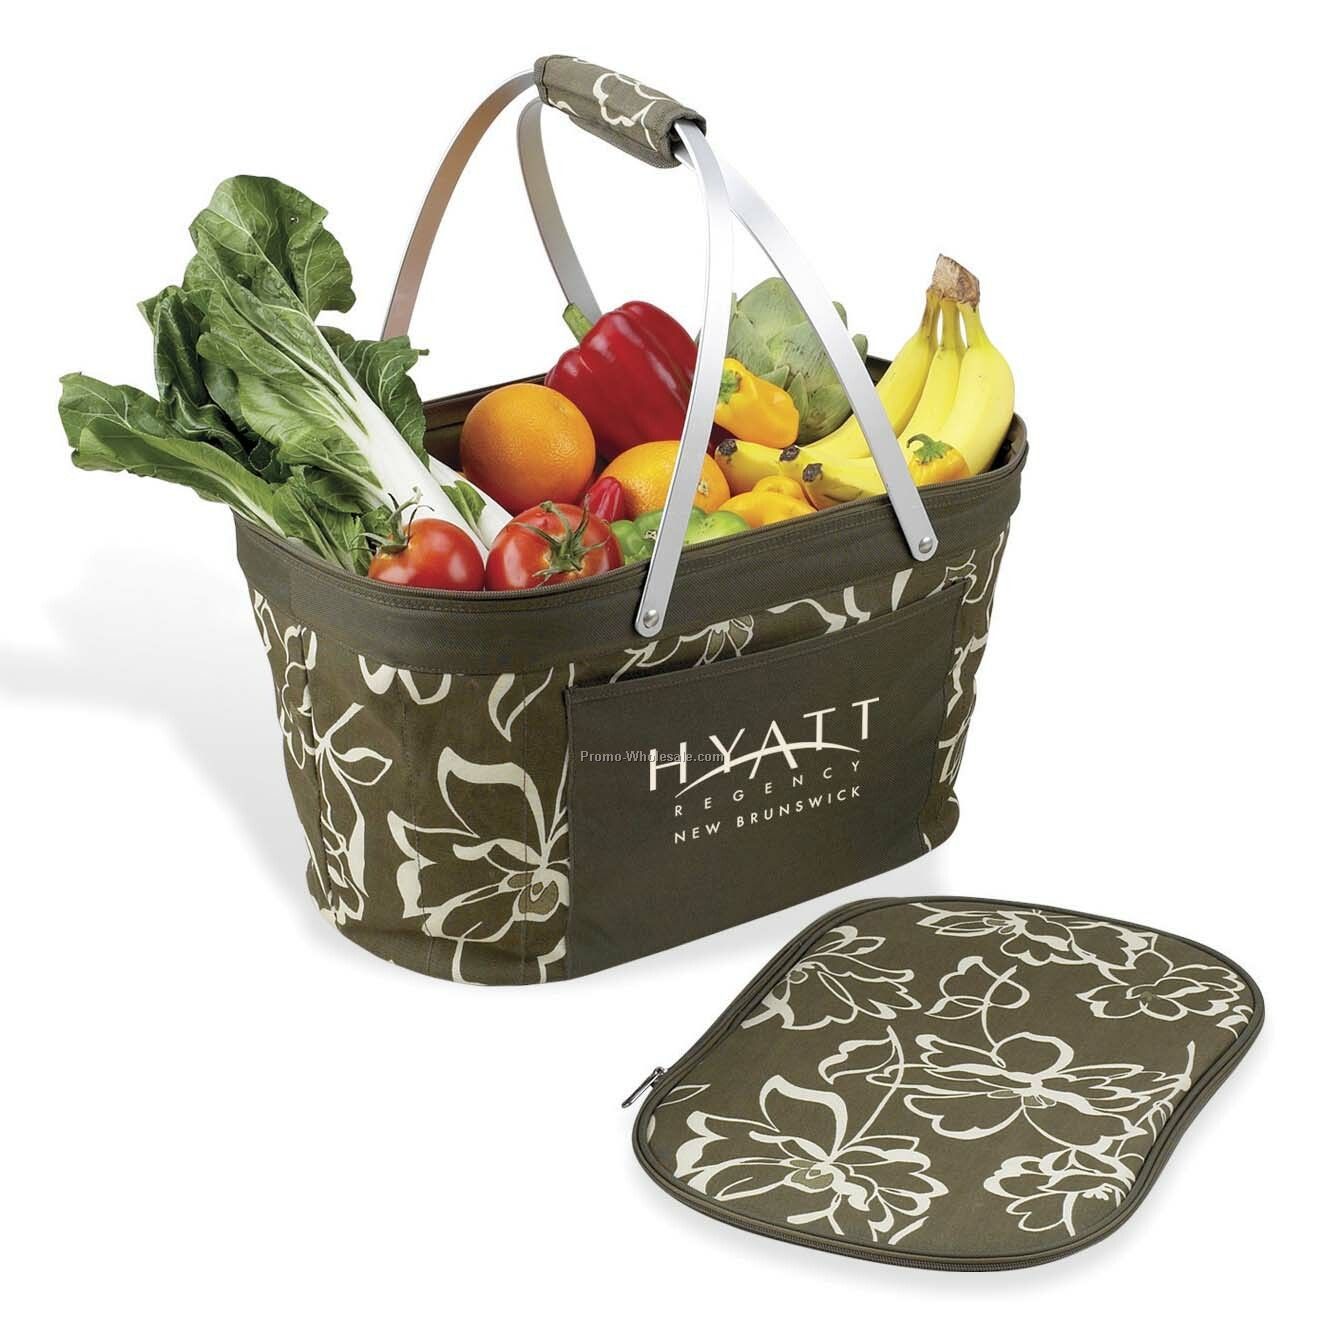 10.5"x 18.5"x 11.5" Collapsible Insulated Basket